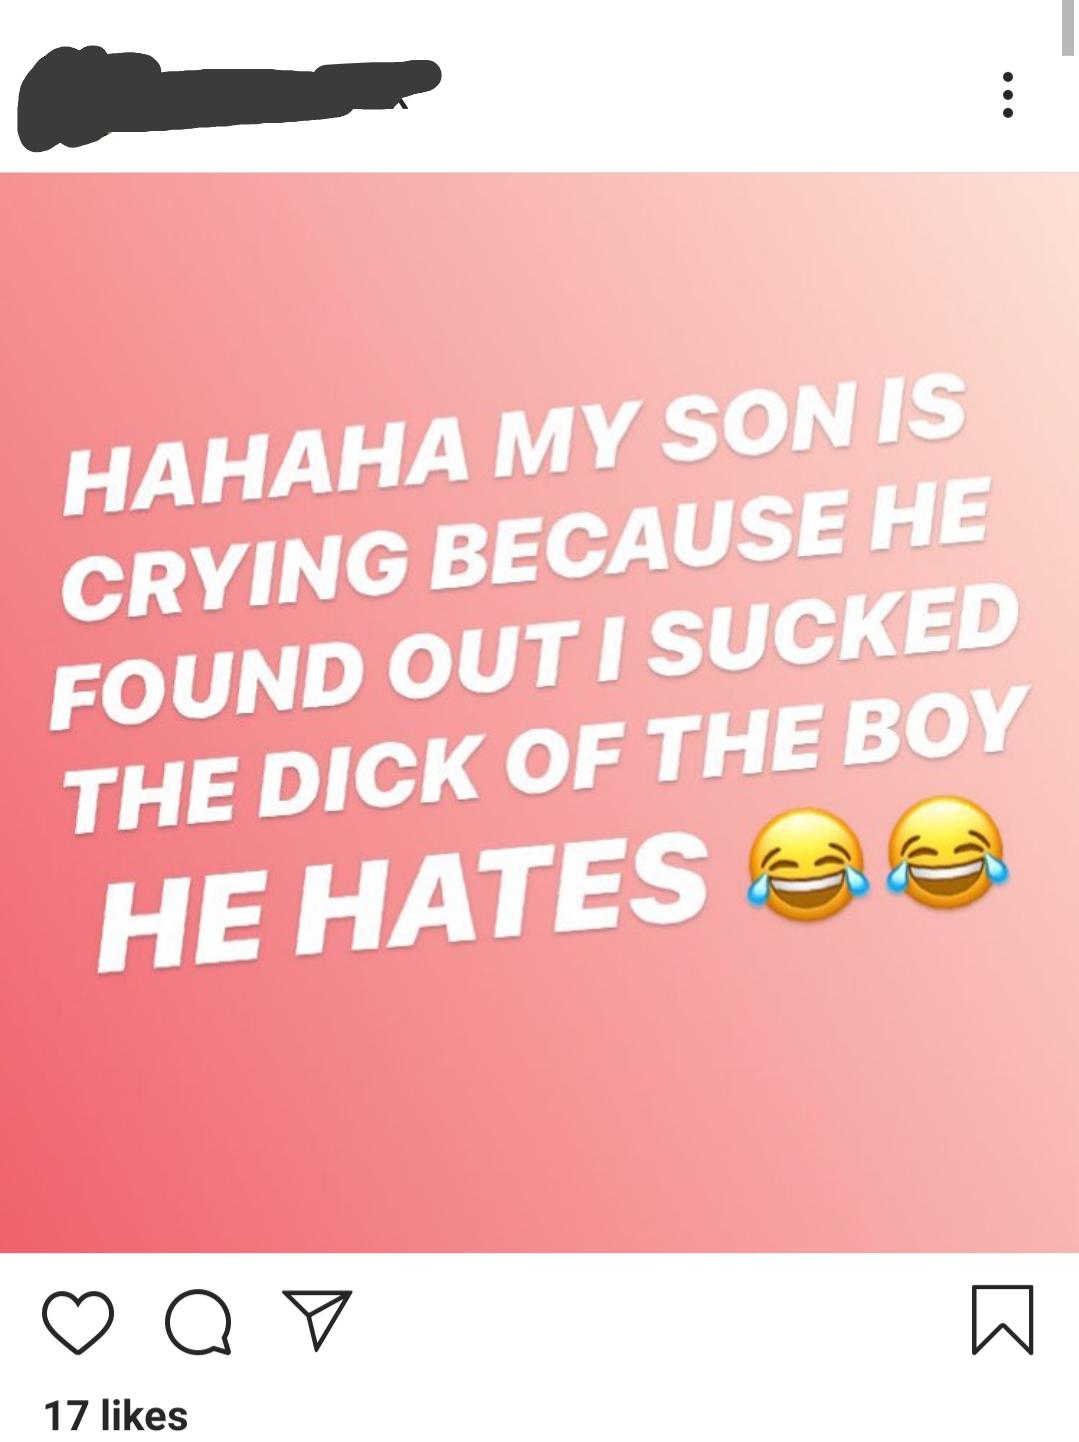 Hahaha My Son Is Crying Because He Found Out I Sucked The Dick Of The Boy He Hates are Q V 17